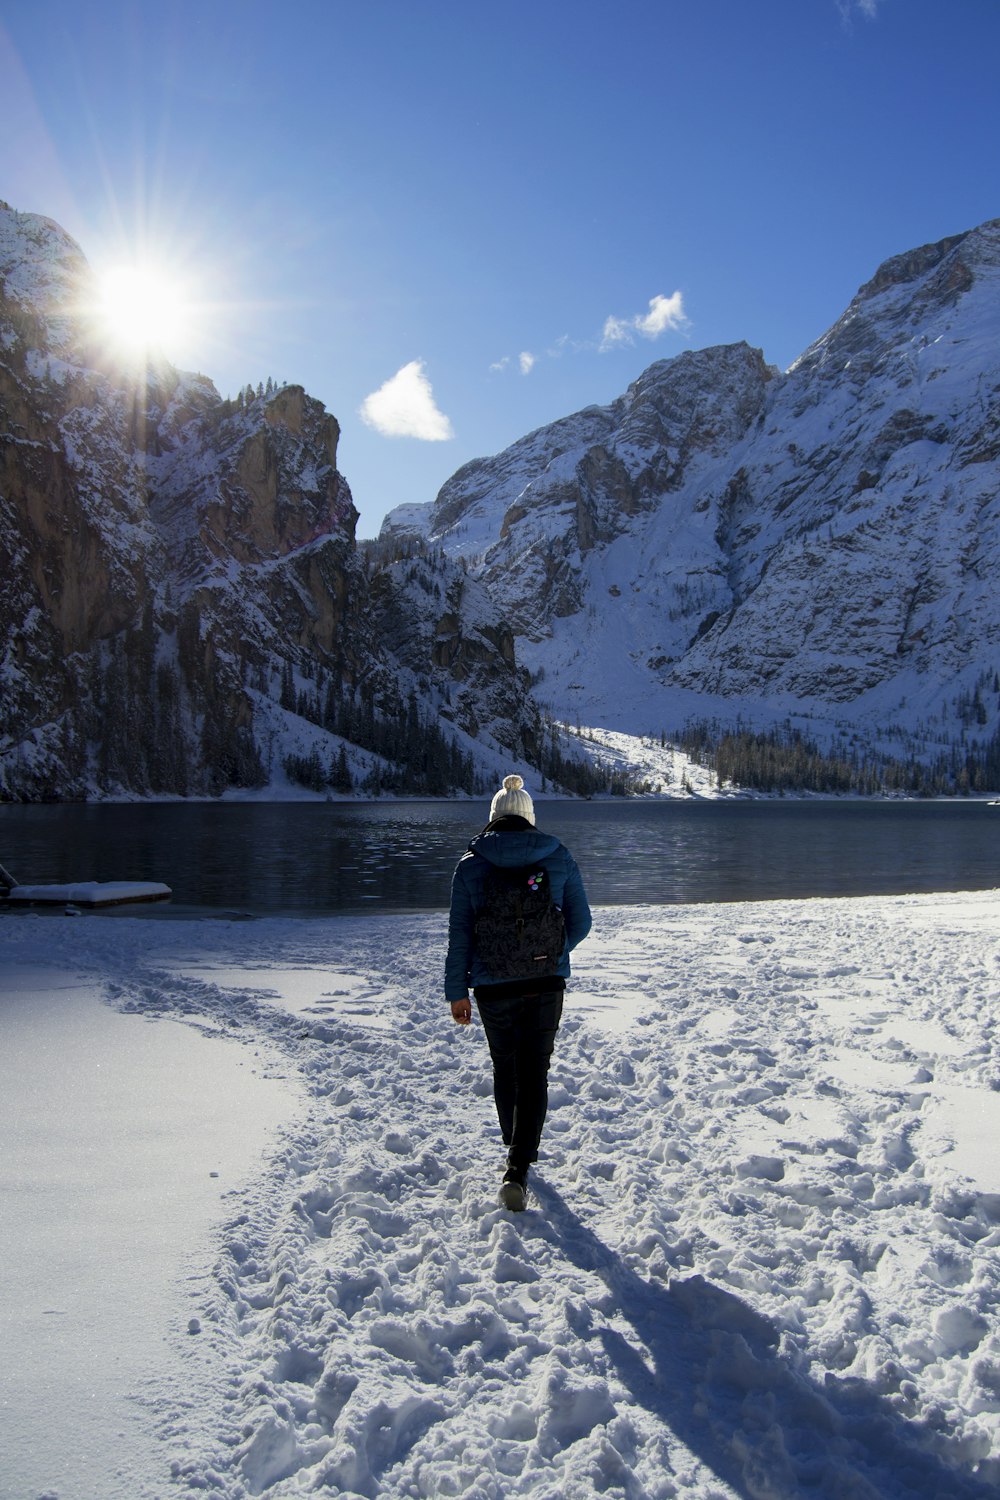 person walking on snow near body of water and mountains